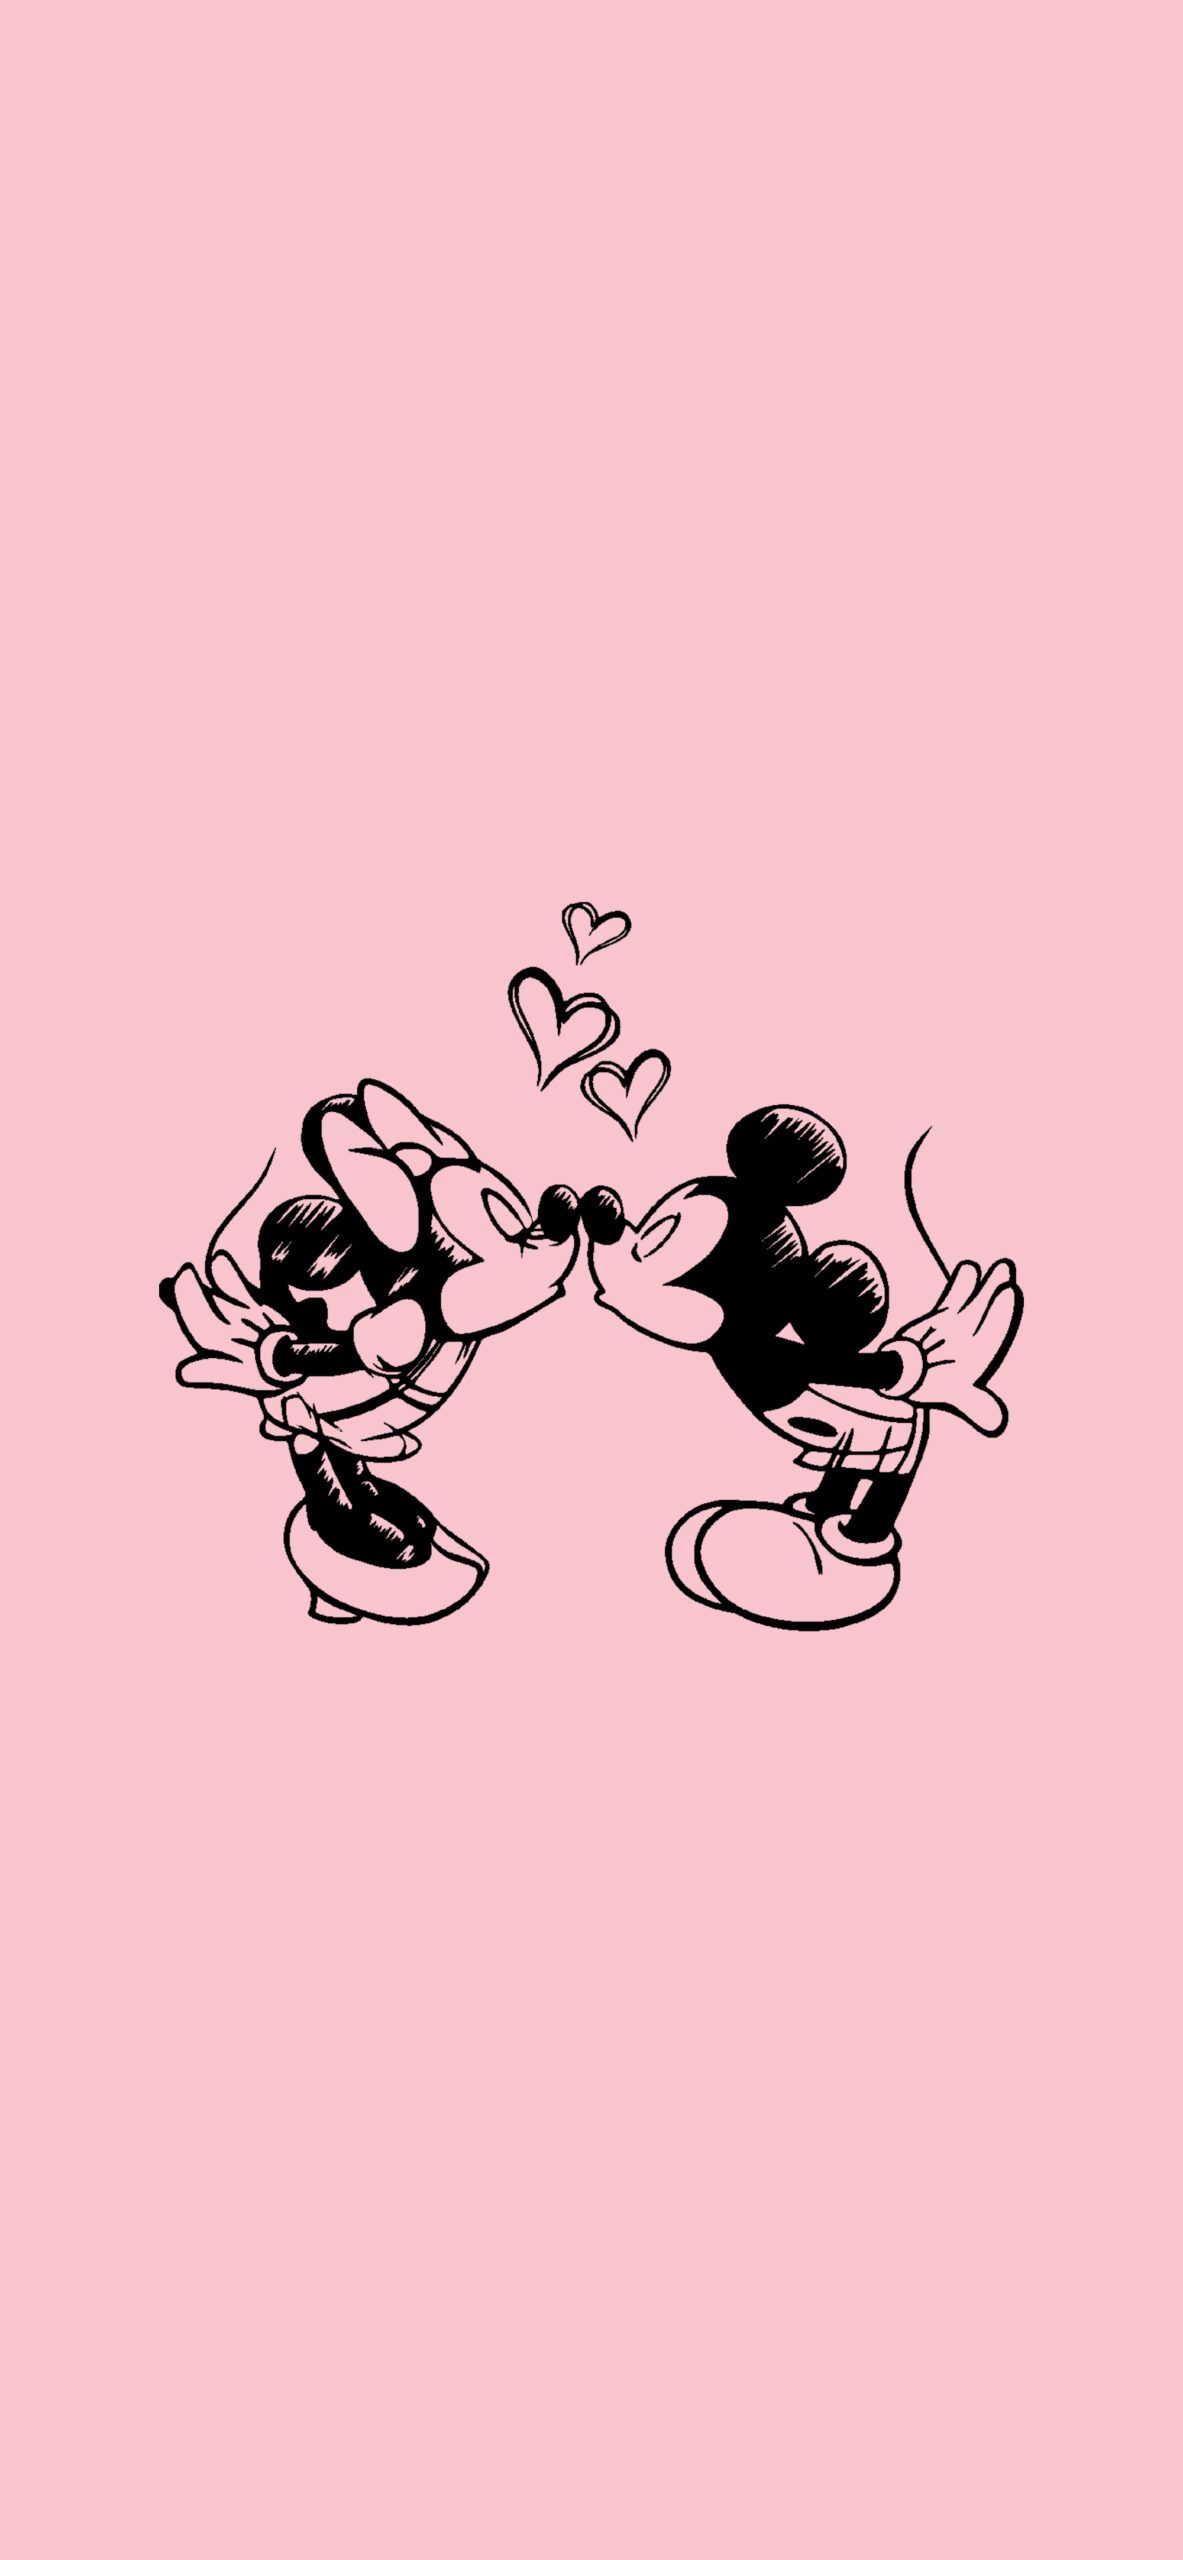 Mickey & Minnie Mouse Pink Wallpaper Aesthetic Wallpaper